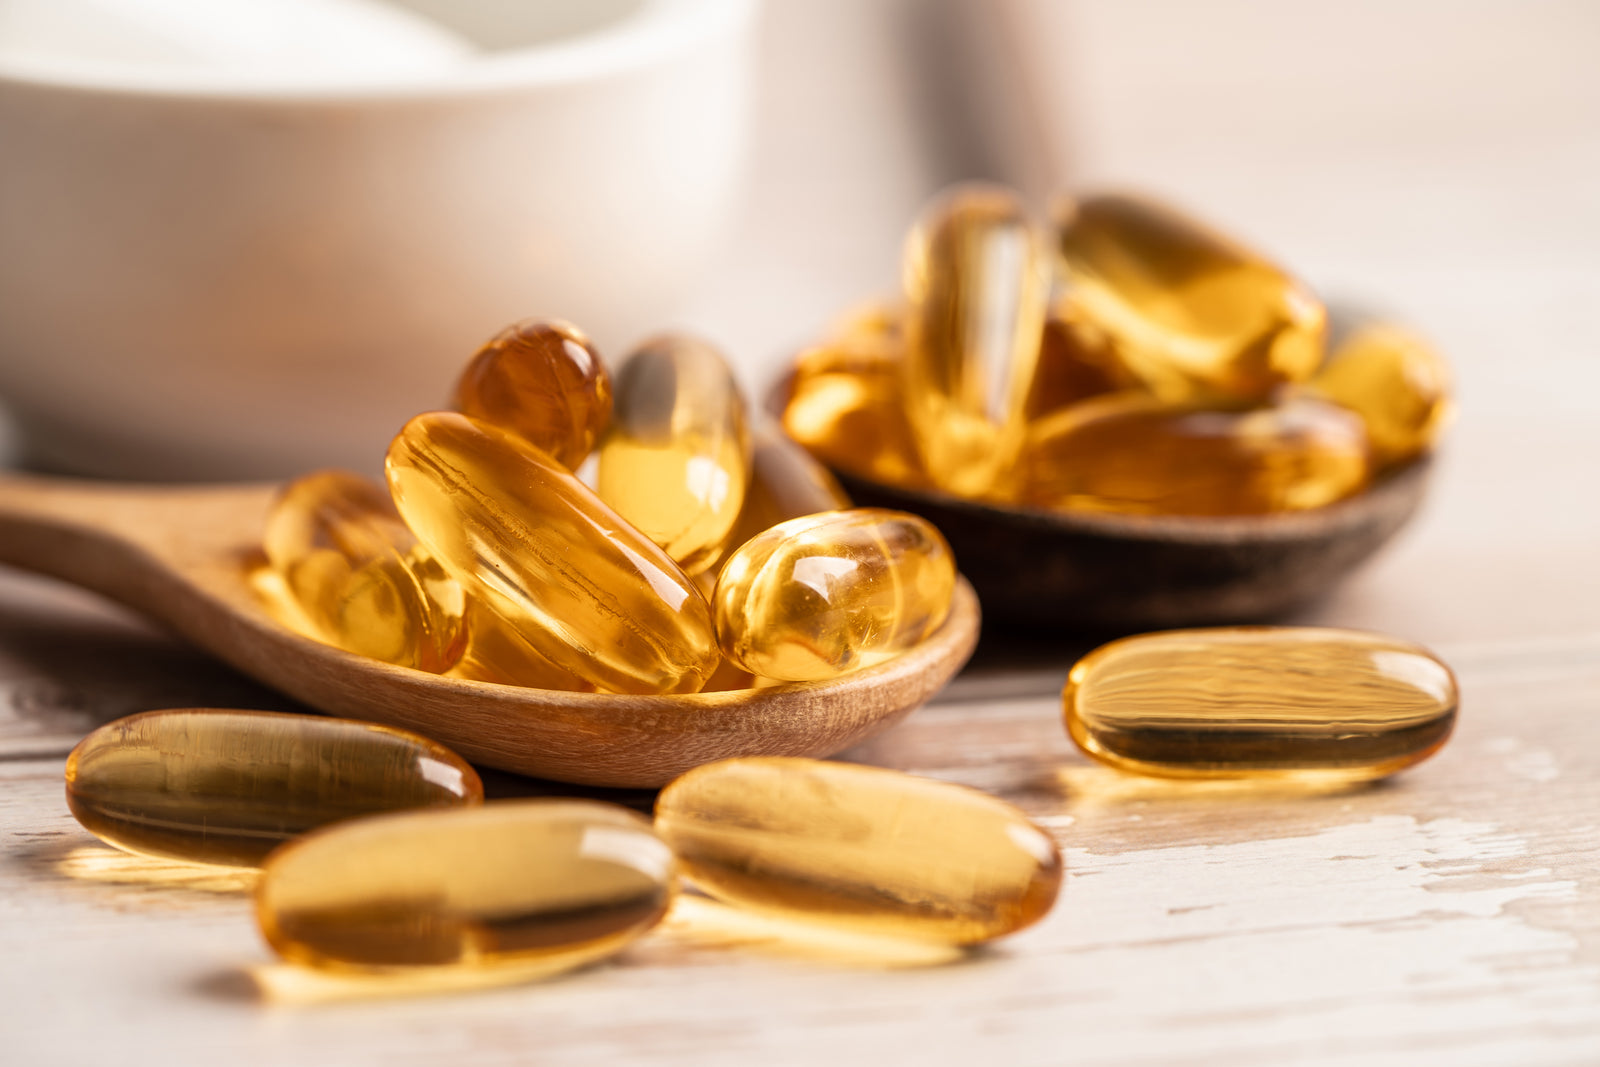 OMEGA 3: DO YOU SEE ANY EFFECT OF FISH OIL IN THE GYM?